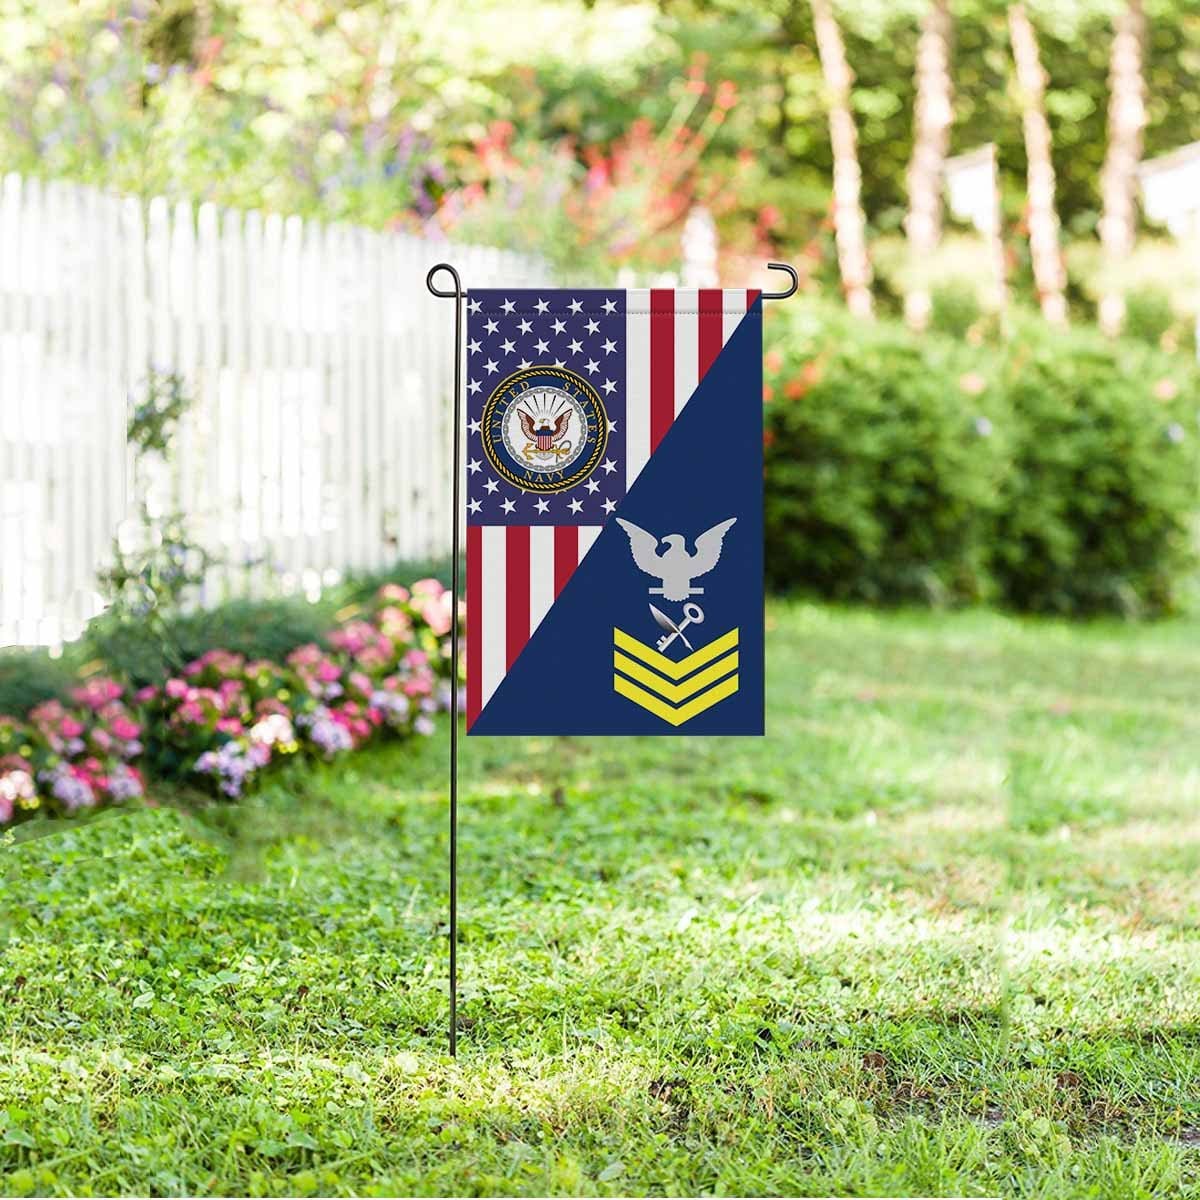 Navy Ship's Serviceman Navy SH E-6 Gold Stripe Garden Flag/Yard Flag 12 inches x 18 inches Twin-Side Printing-GDFlag-Navy-Rating-Veterans Nation